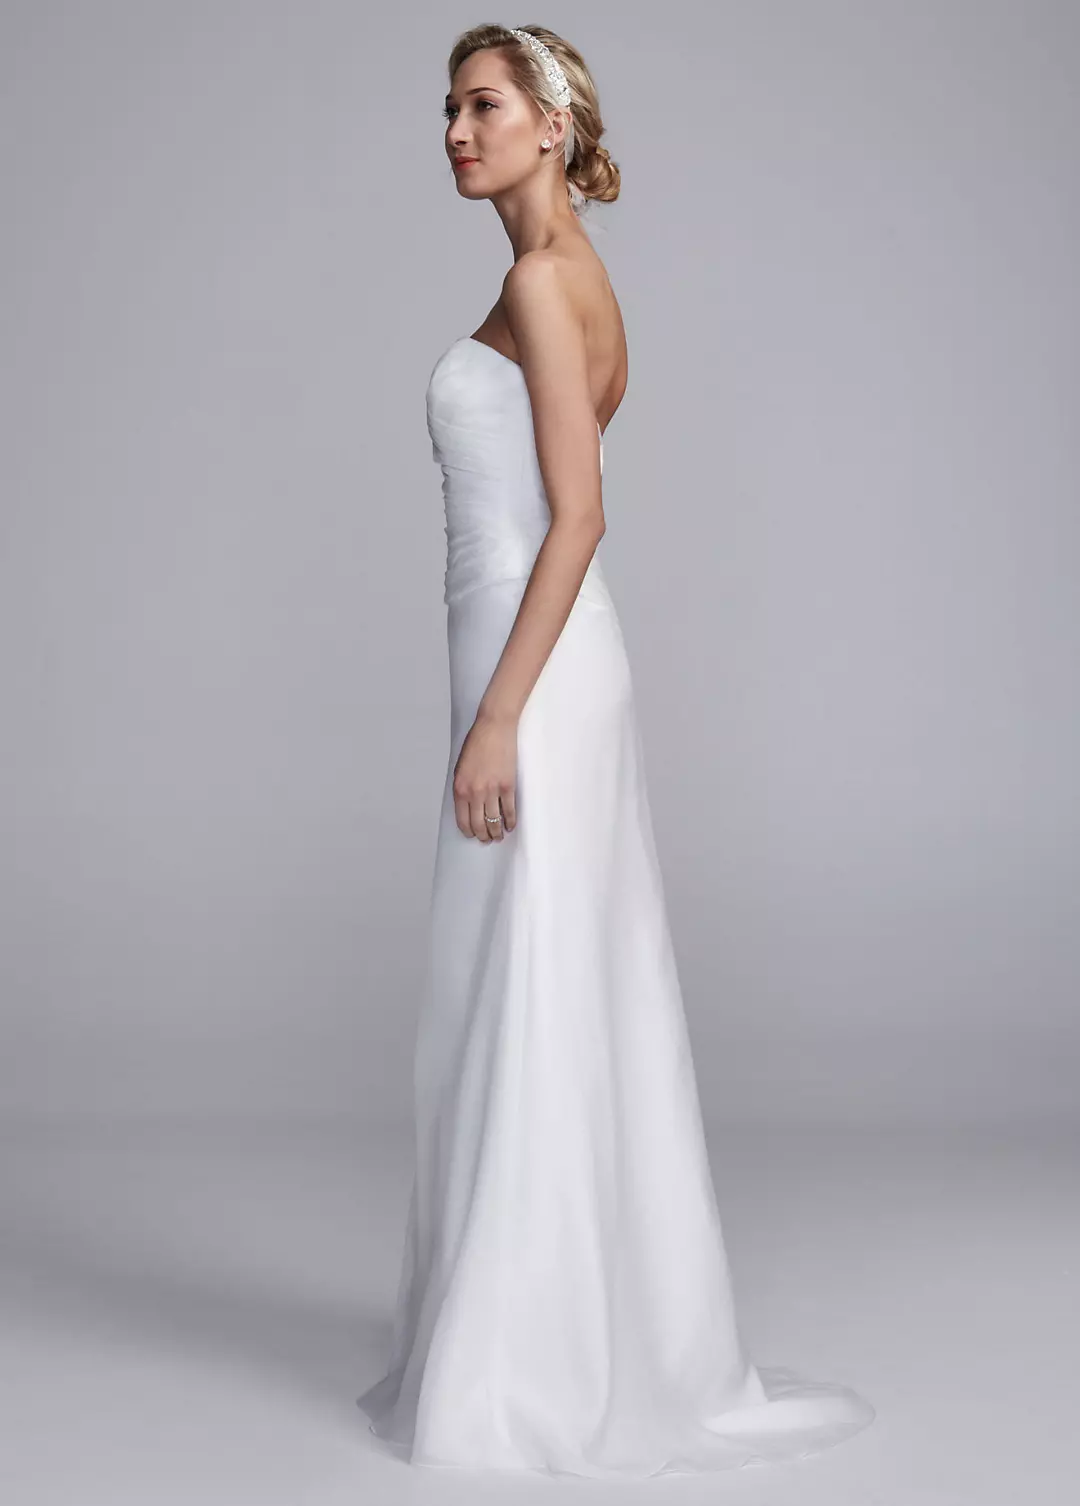 Strapless Satin Sheath Gown with Side Drape Image 3